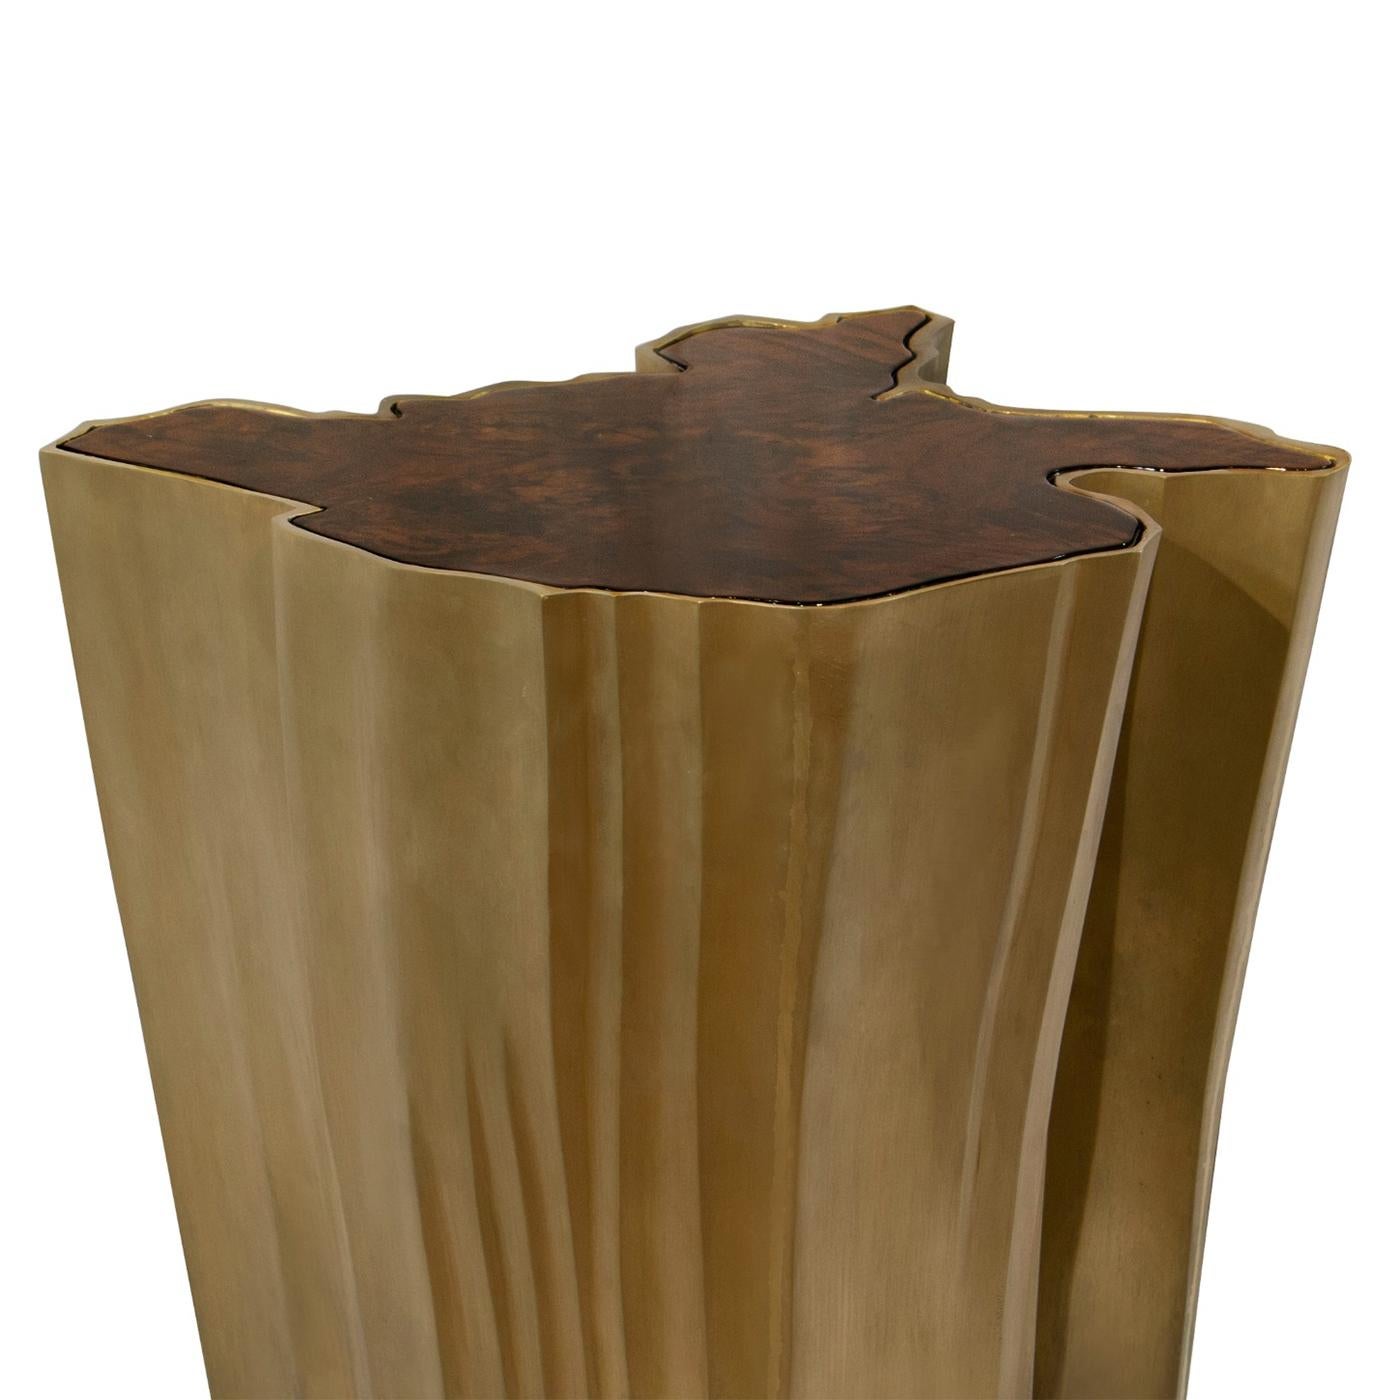 Side Table Walnut Top with walnut veneer top in matte finish.
Base in casted solid brass in brushed finish with glossy varnished.